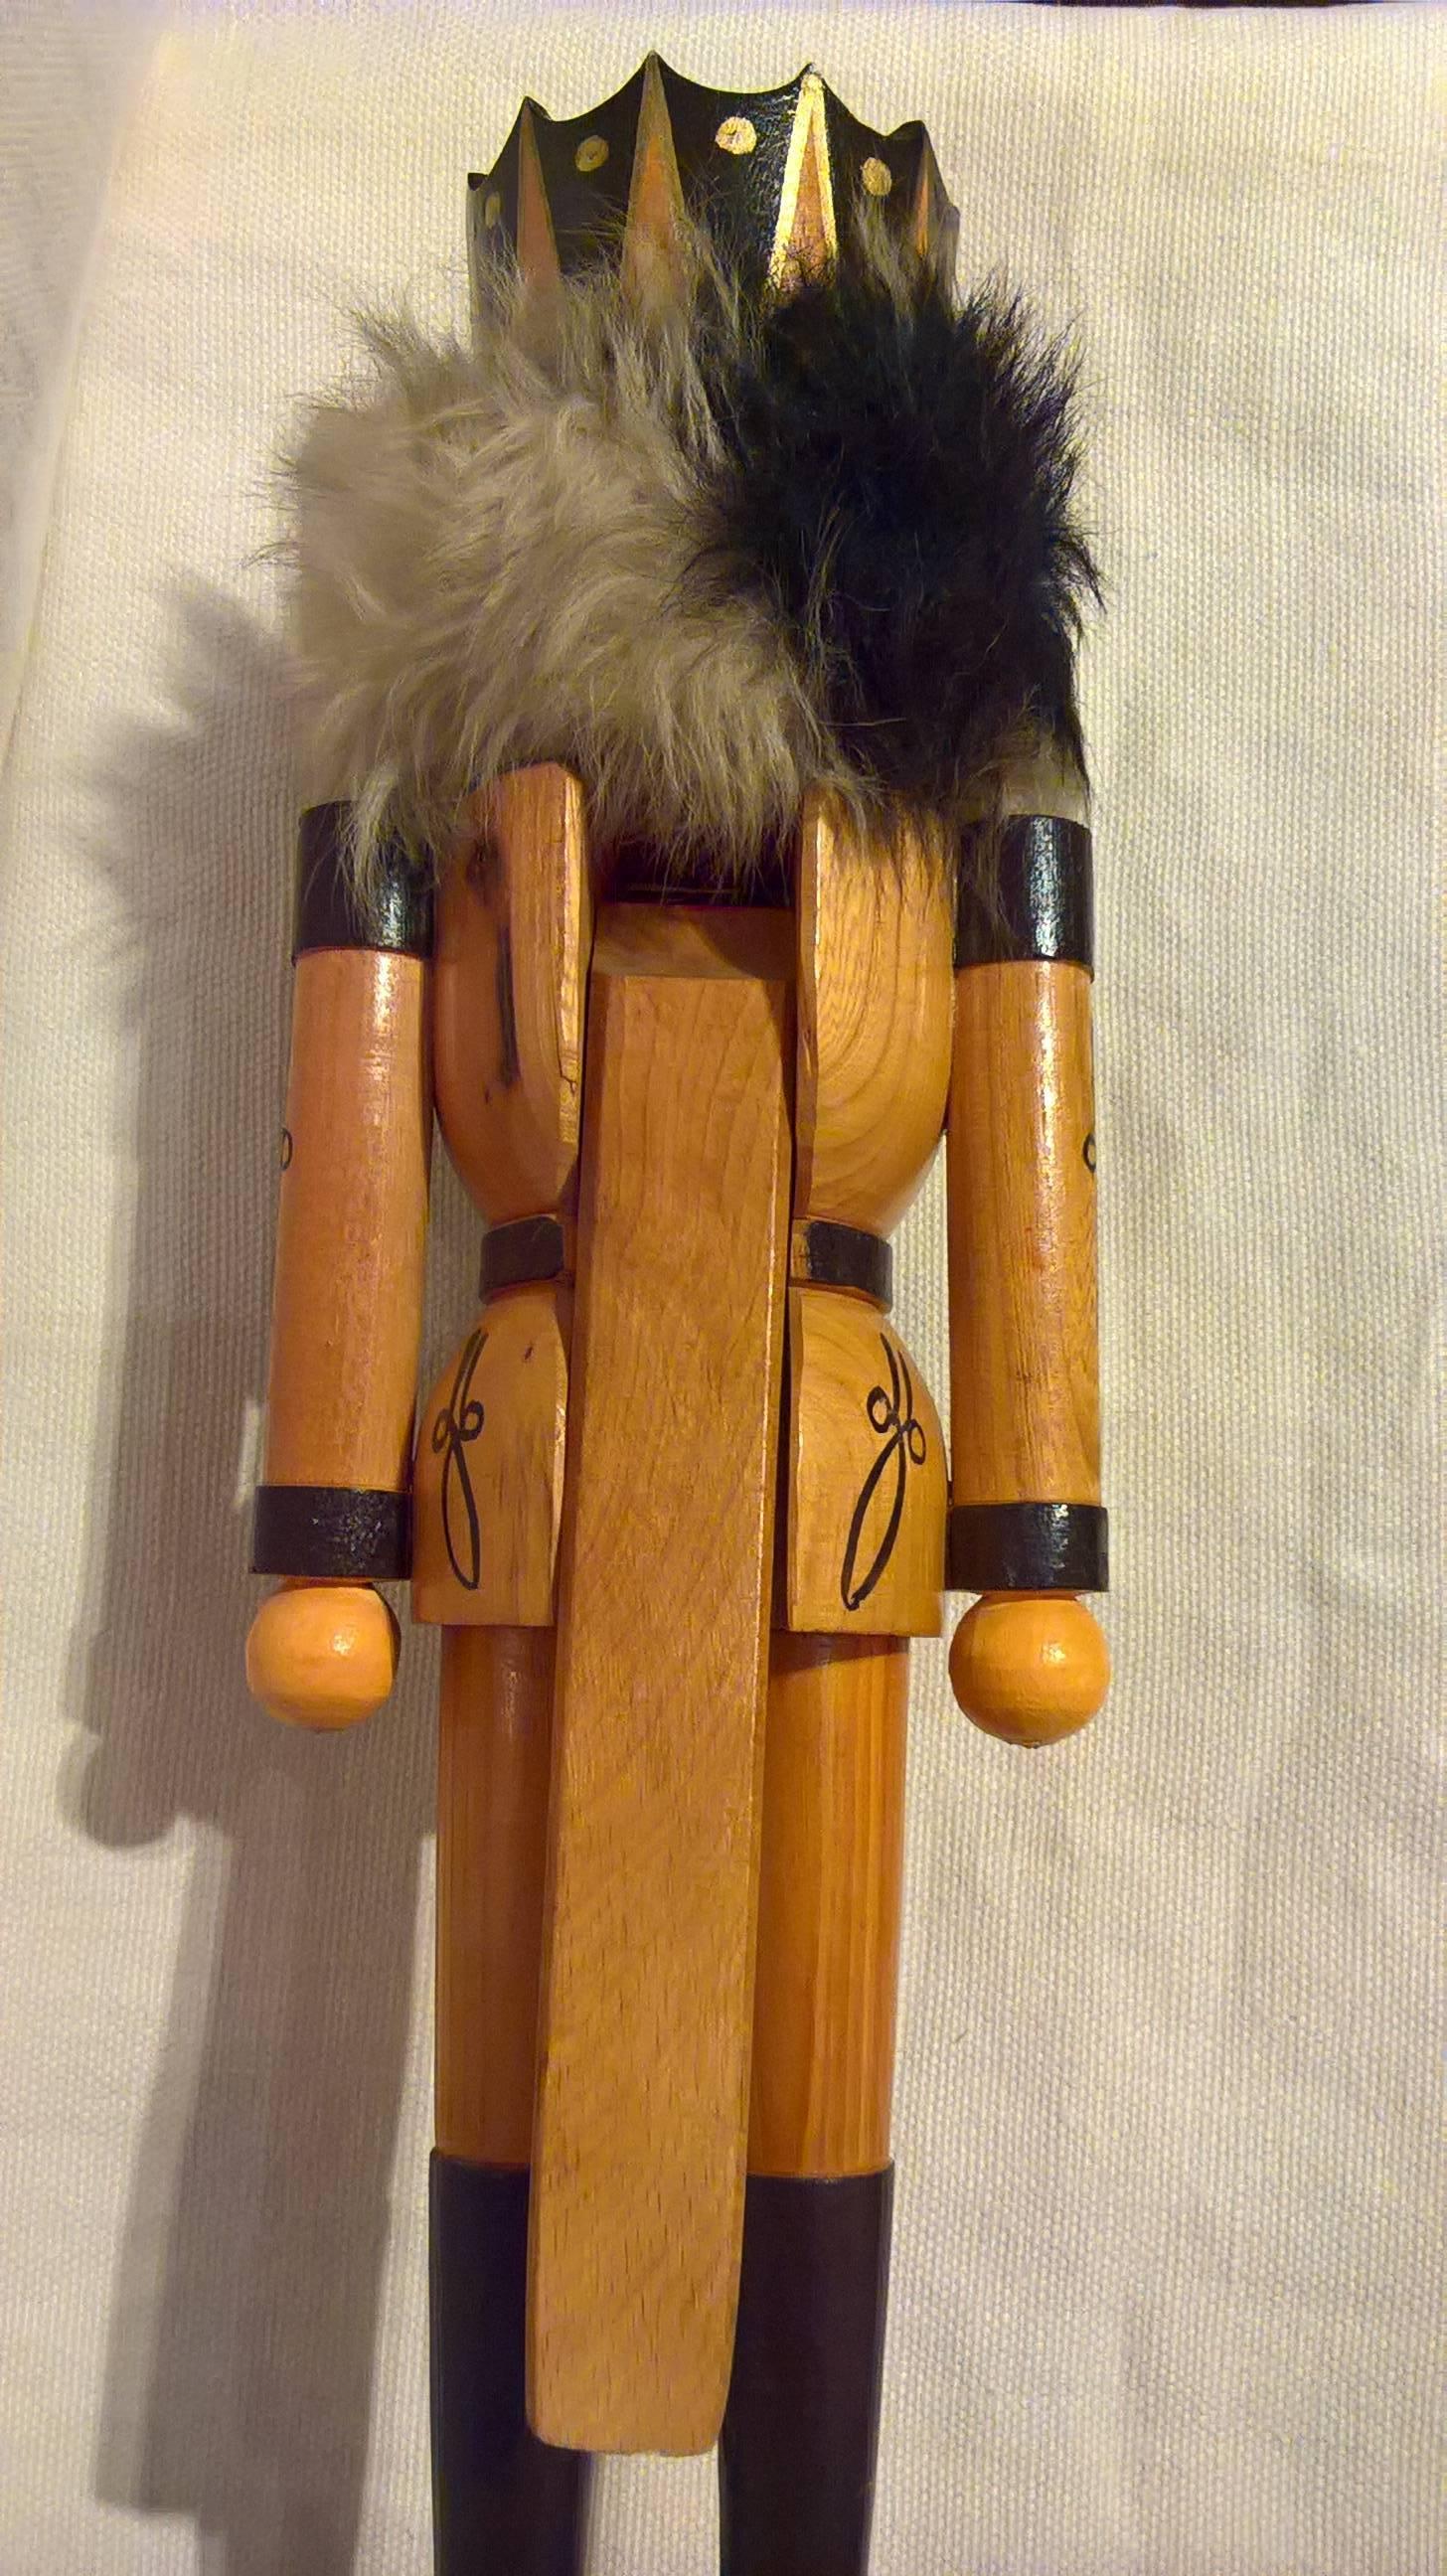 Arts and Crafts Vintage Christmas Nutcracker from Erzgebirge